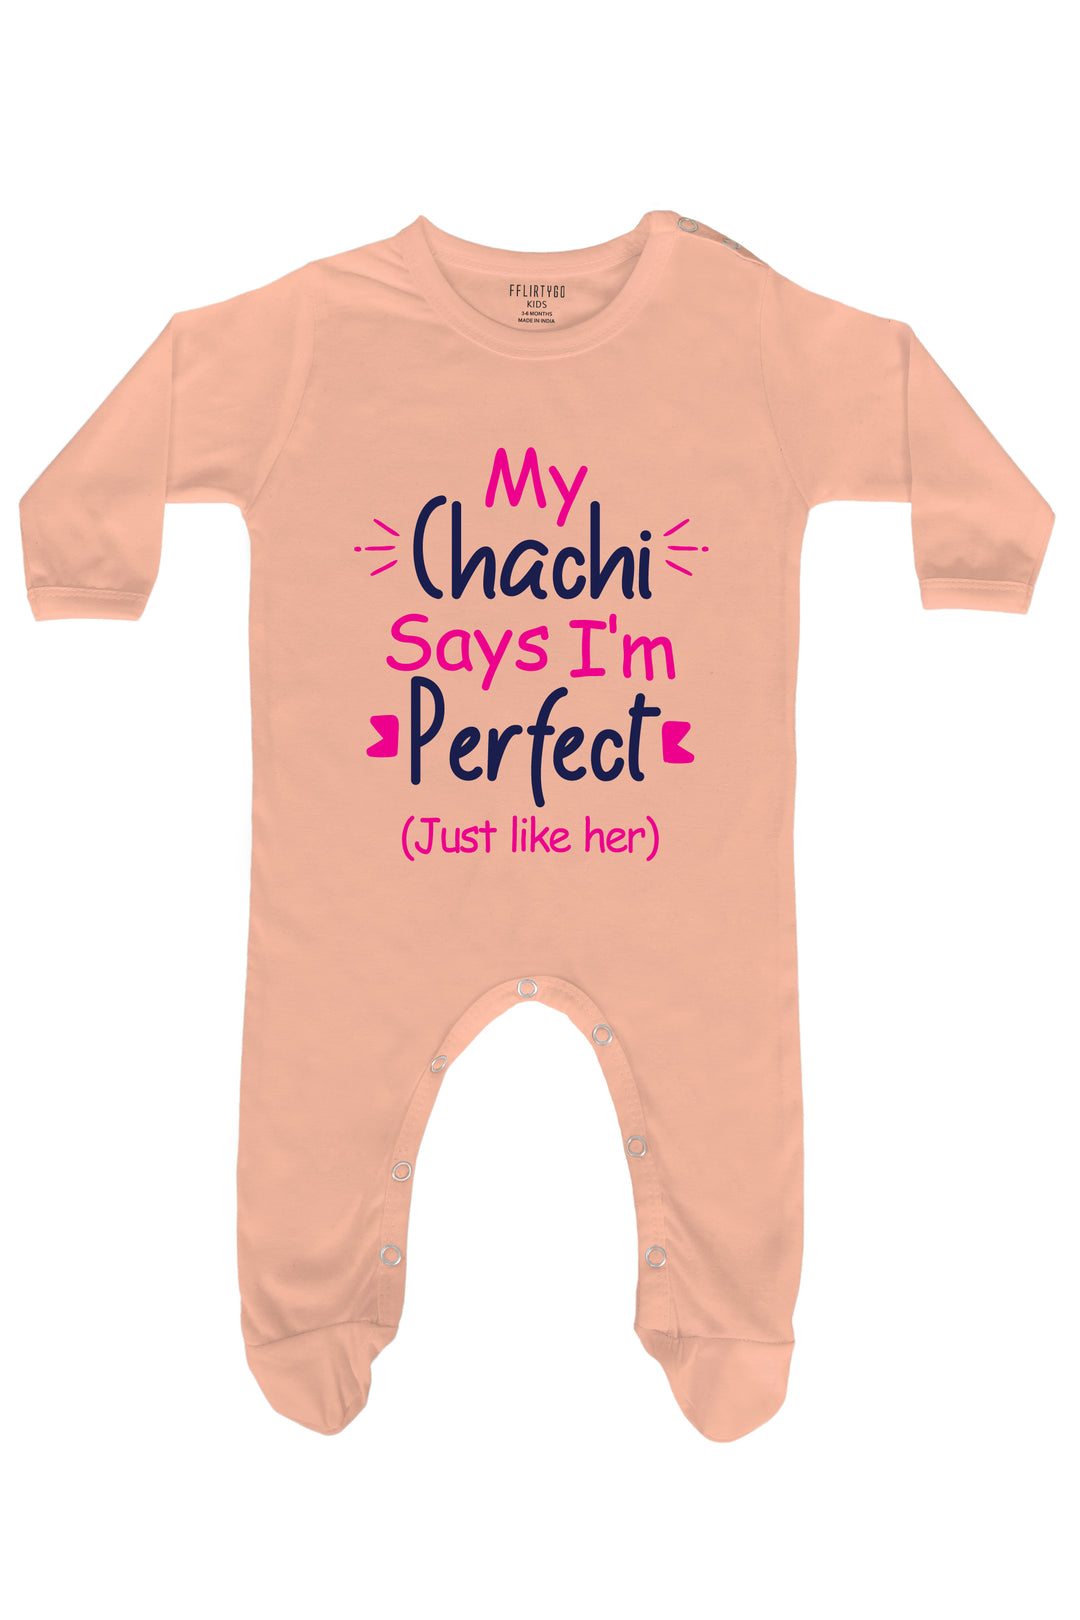 Chachi Say's I'M Perfect Baby Romper | Onesies